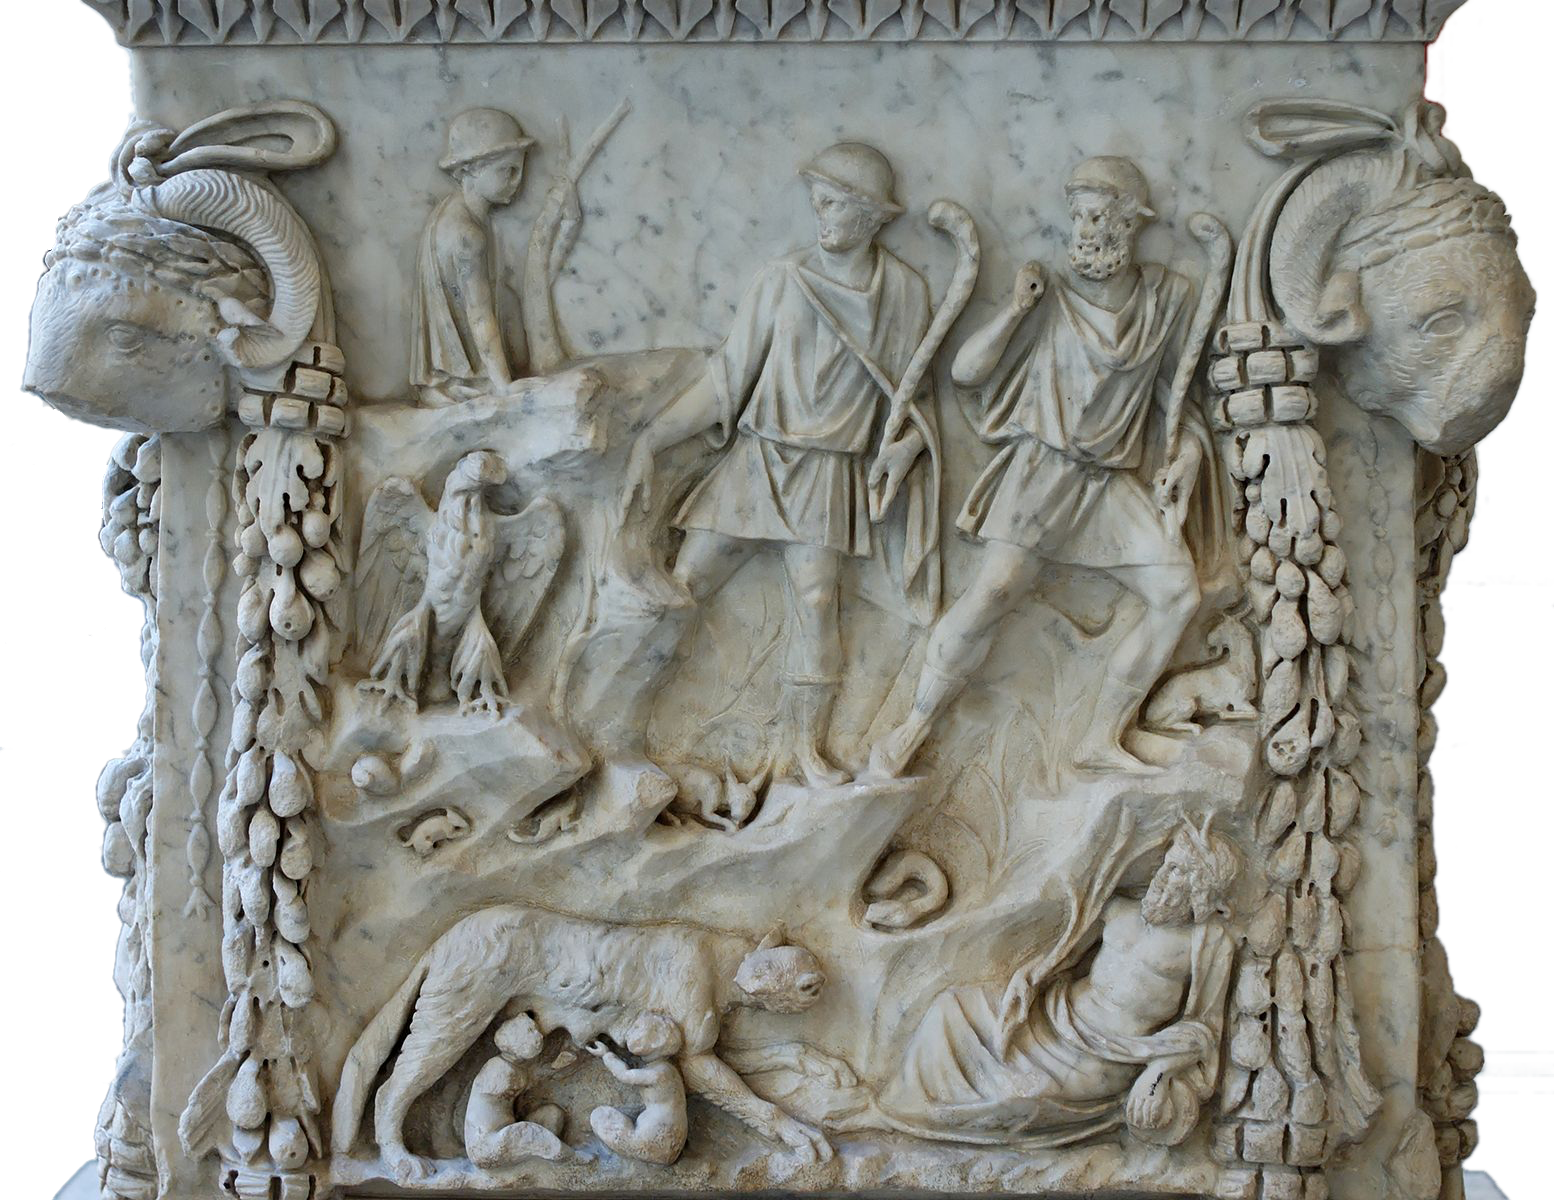 The bottom of a carved Roman altar showing Romulus and Remus at the bottom being suckled by a wolf in a cave and then with a shepherd. There is also a depiction of the personified Tiber and an eagle.